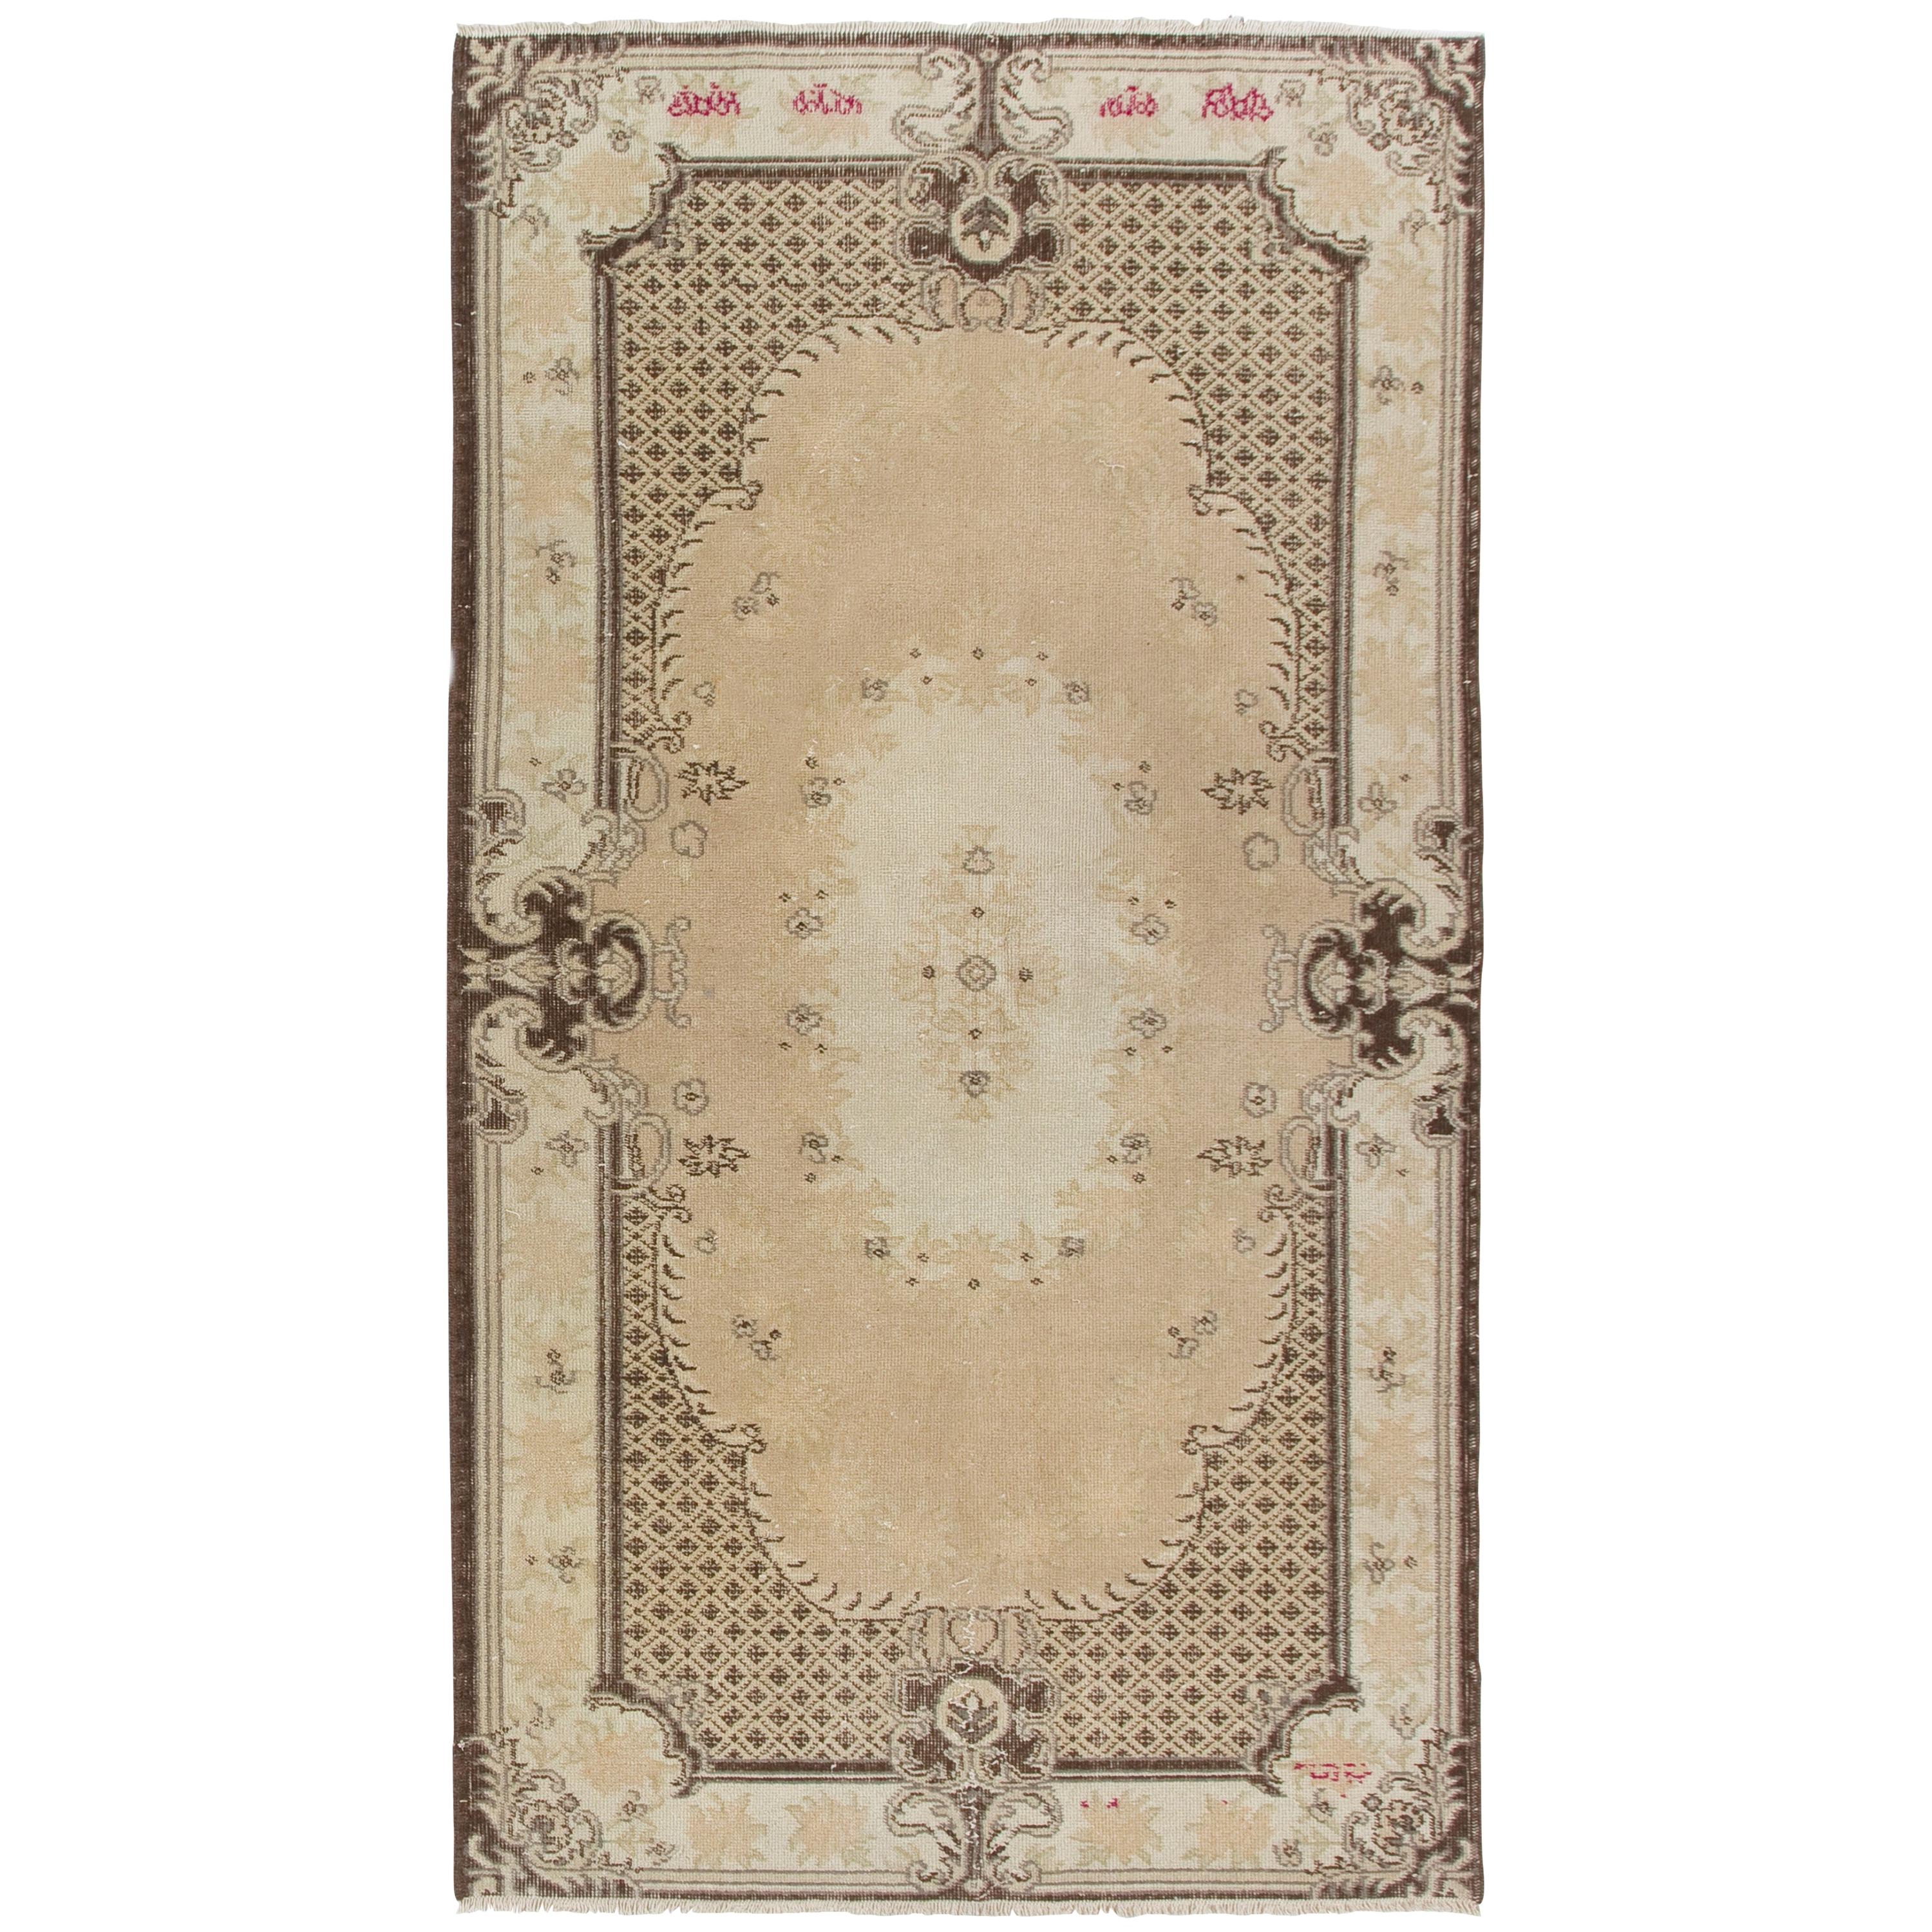 Vintage Rug with French Aubusson Design, 4x7 Ft